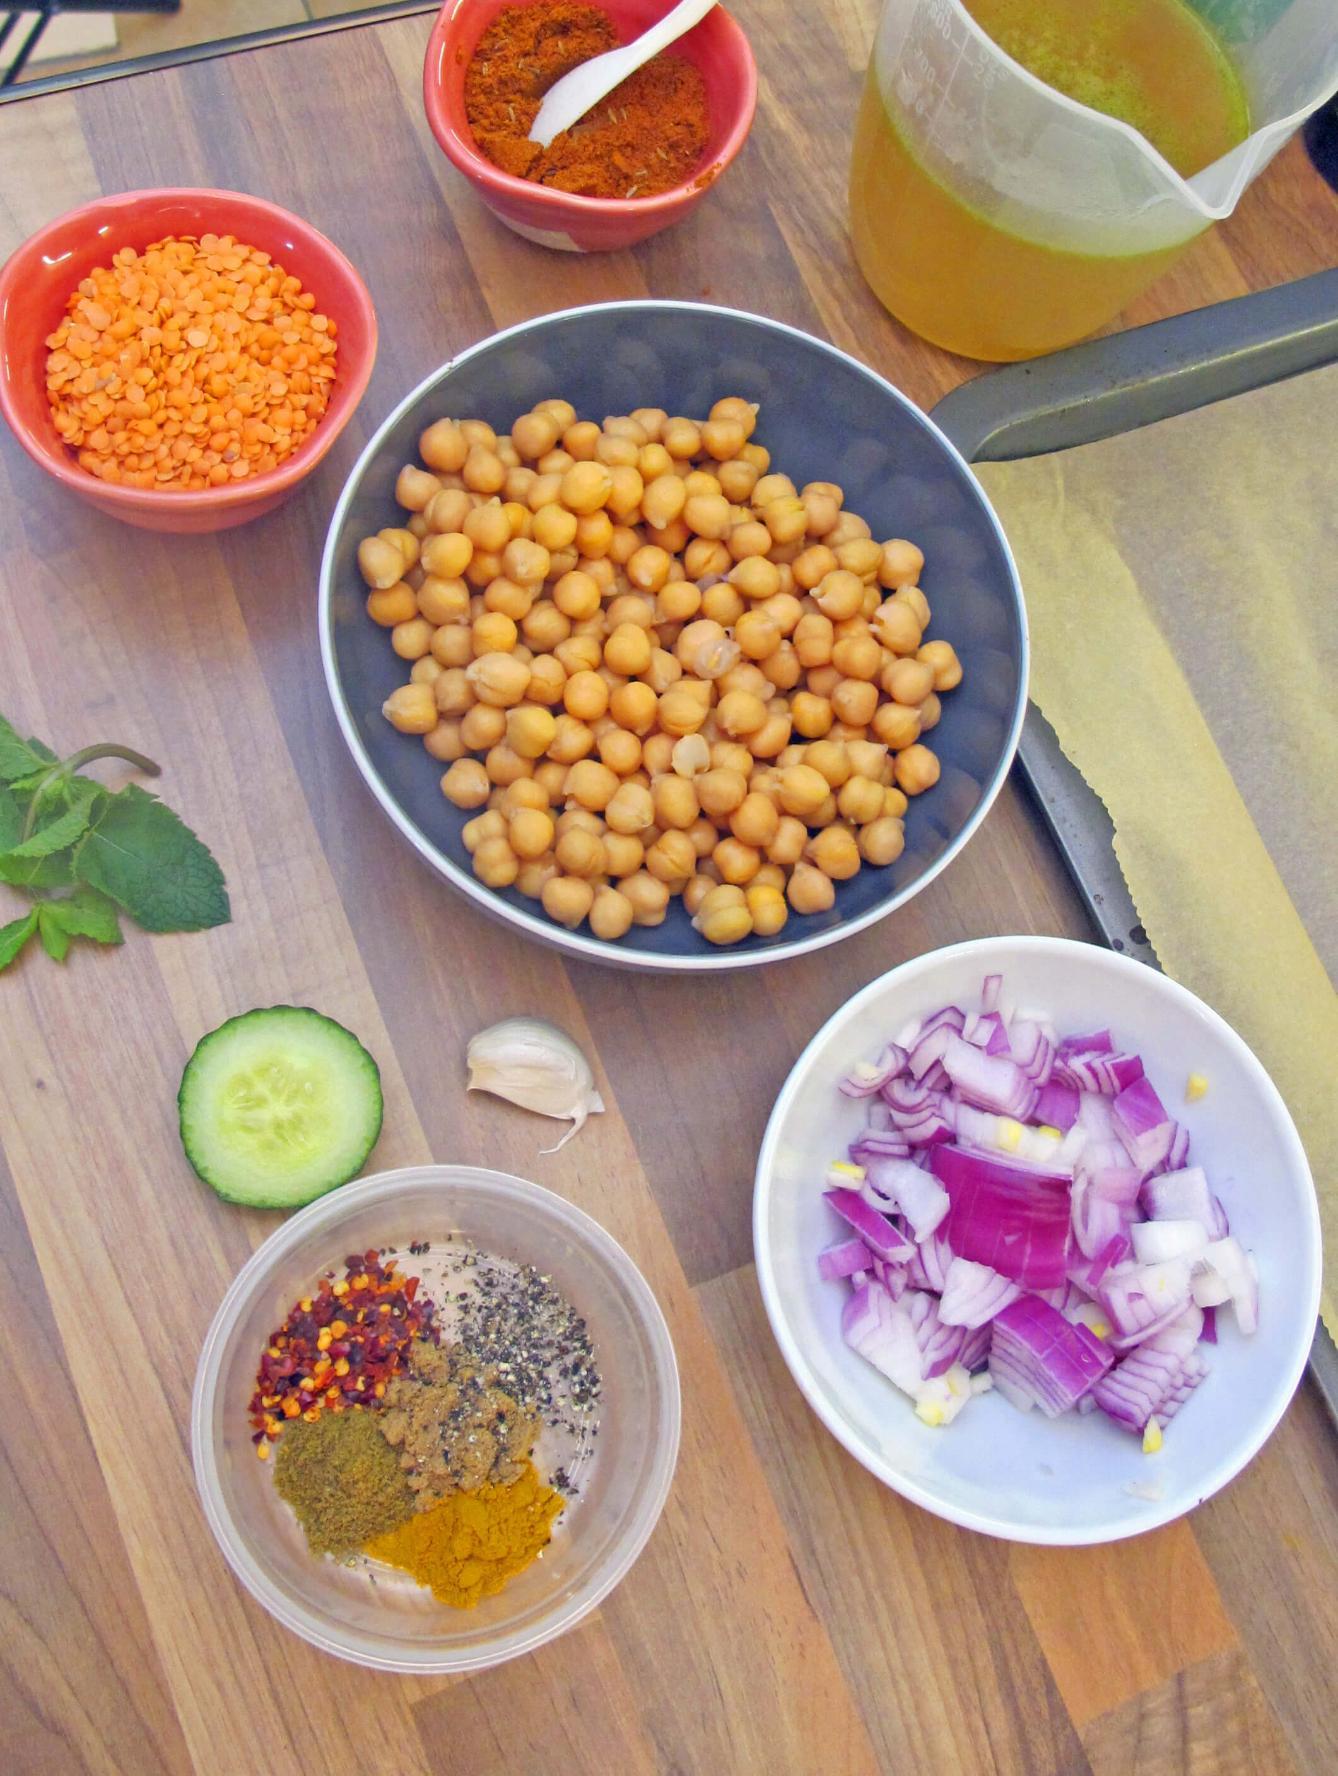 Curry ingredients